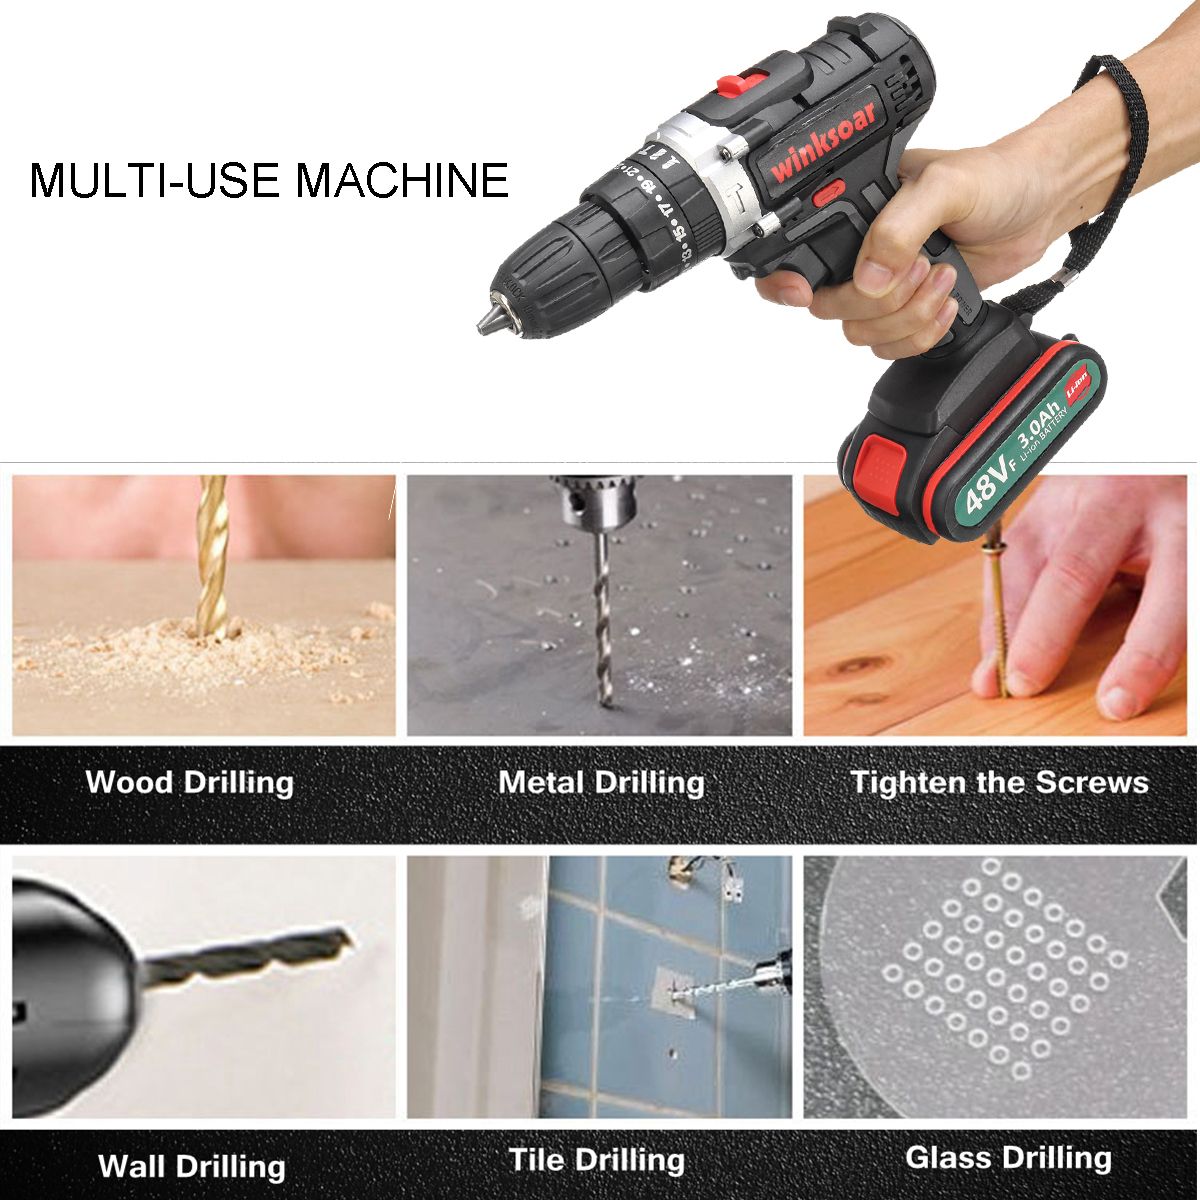 48VF-30Ah-Cordless-Power-Drills-Rechargable-Electric-Drill--251-Torque-Drilling-Power-Tool-1474524